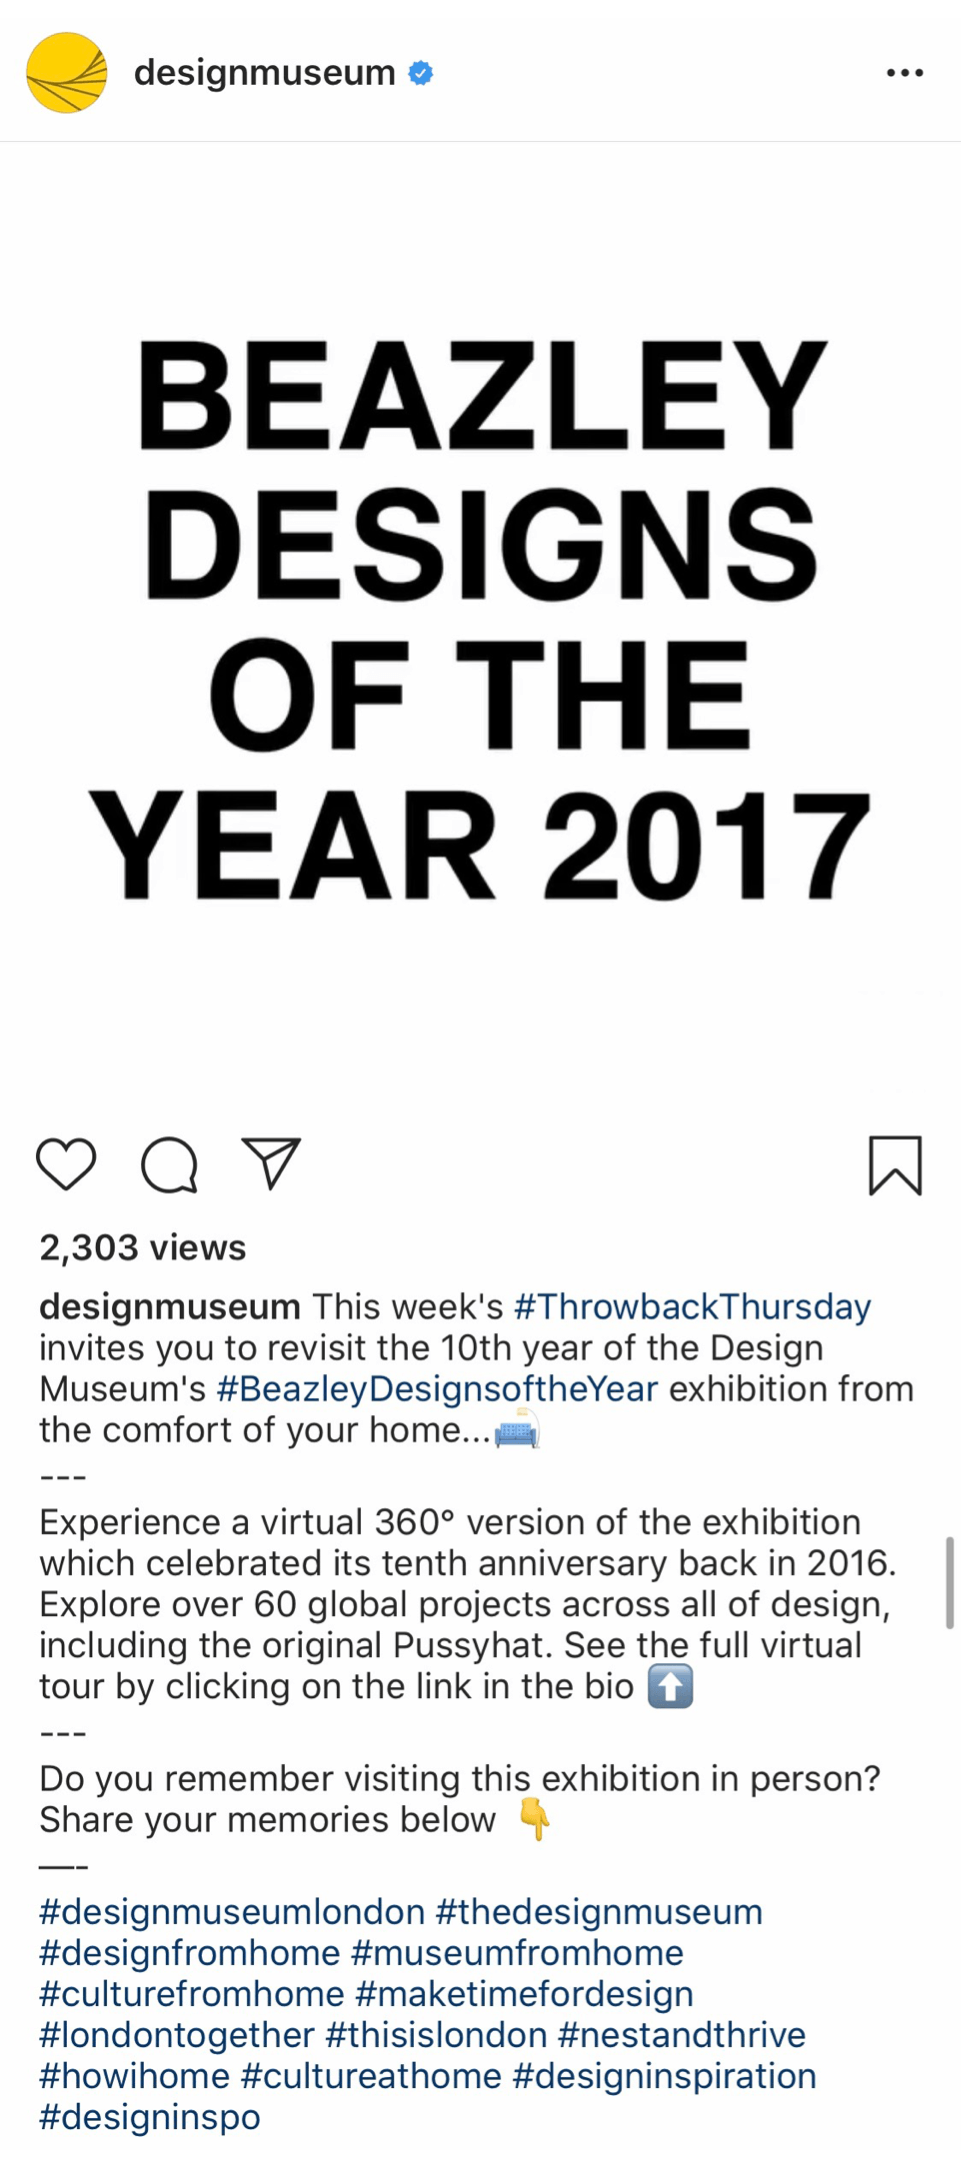 Question included in Instagram post description by @designmuseum